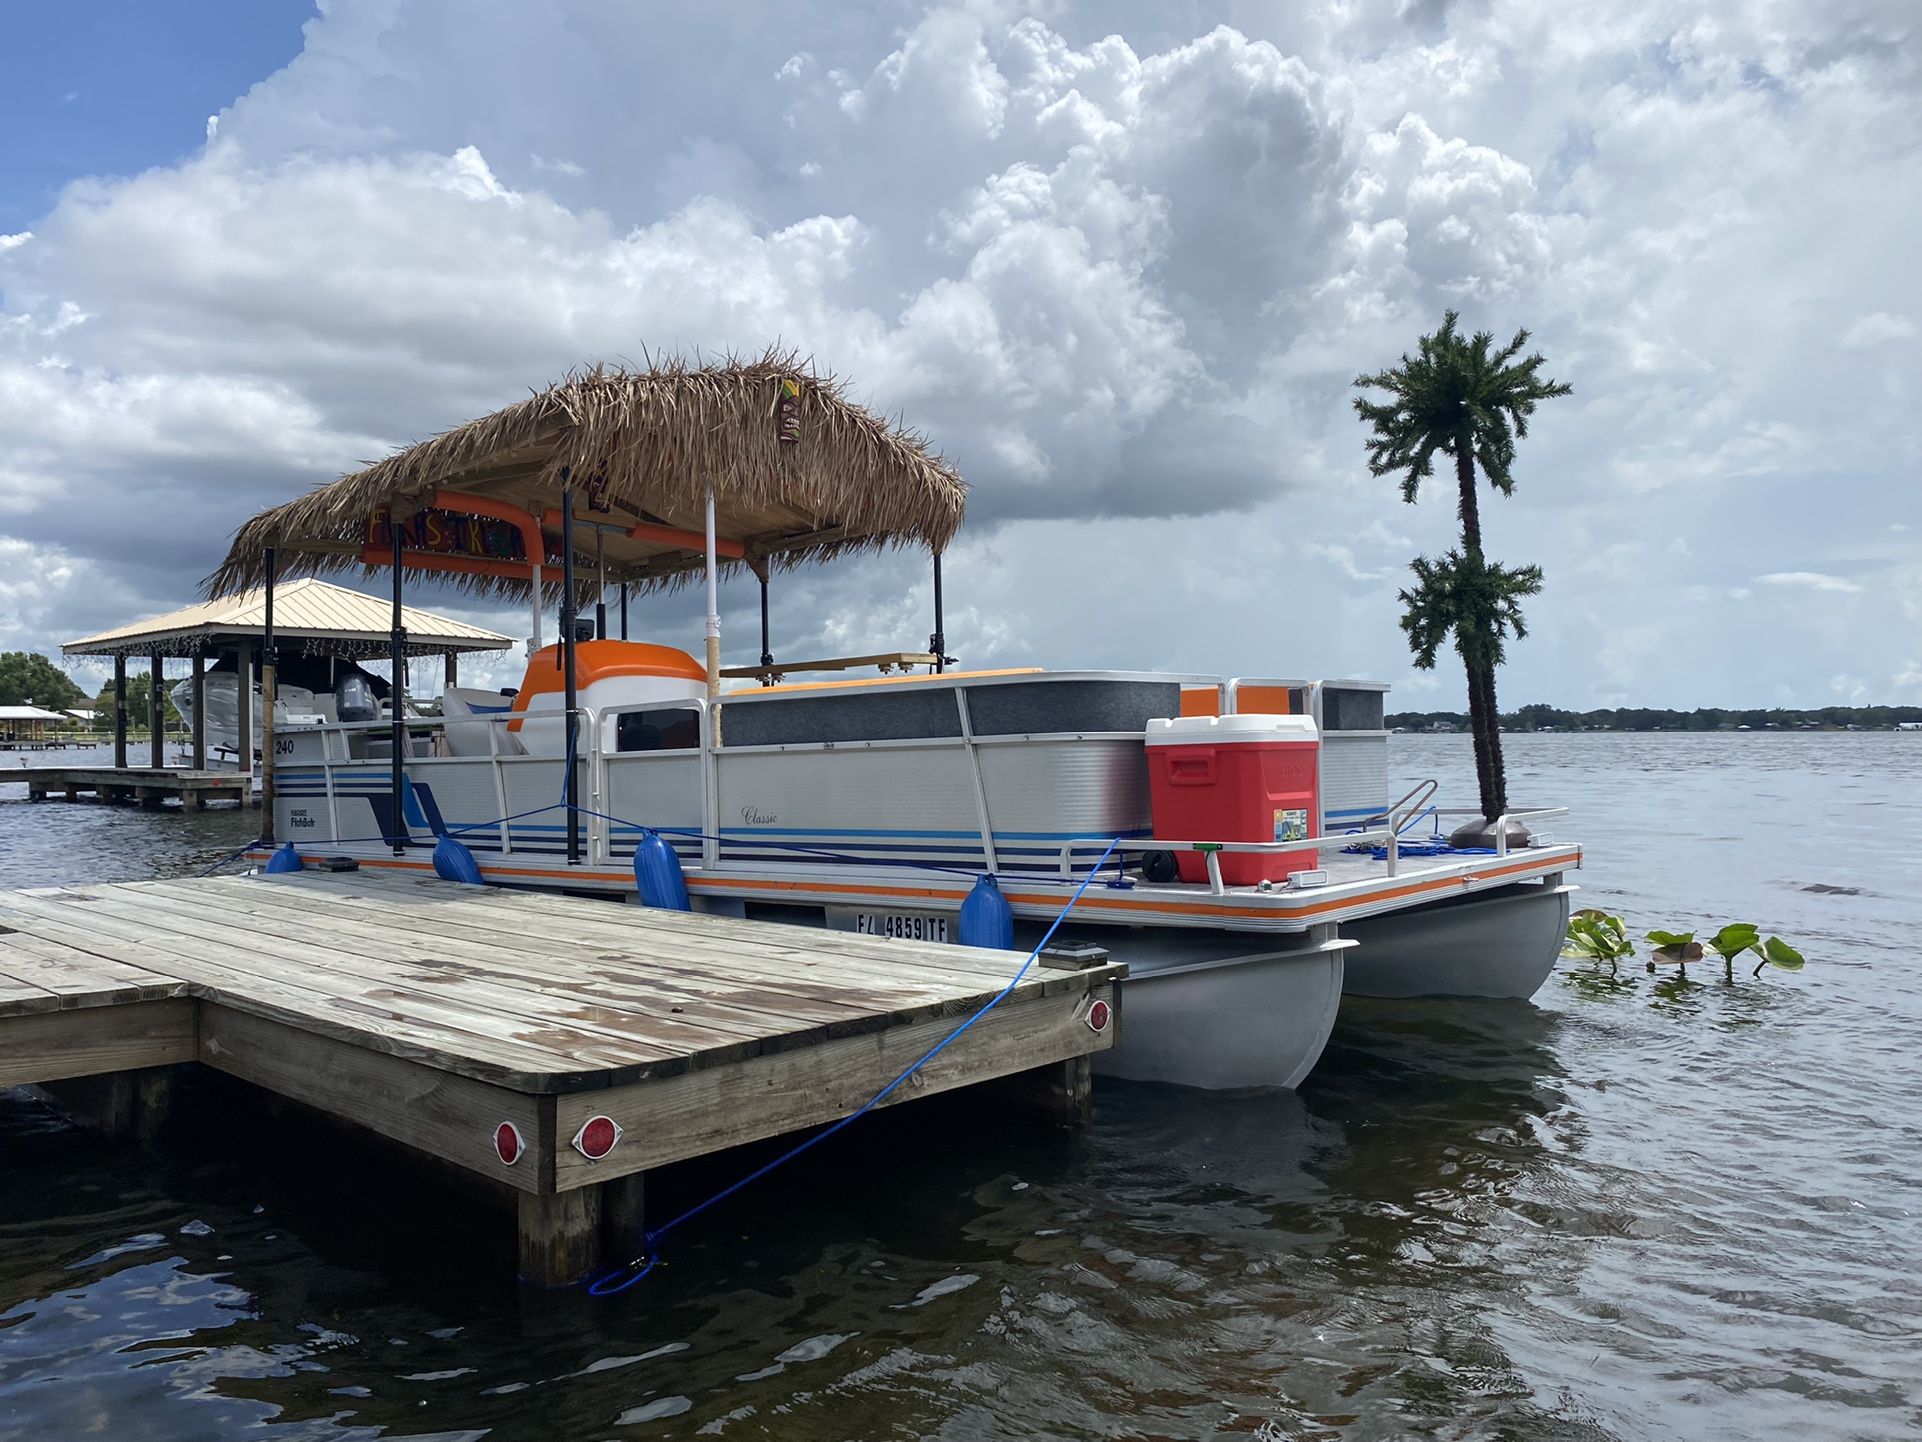 Pontoon Boat Tiki Bar Perfect For Business Or Enjoy With Family. Completely Renovated In Perfect Shape